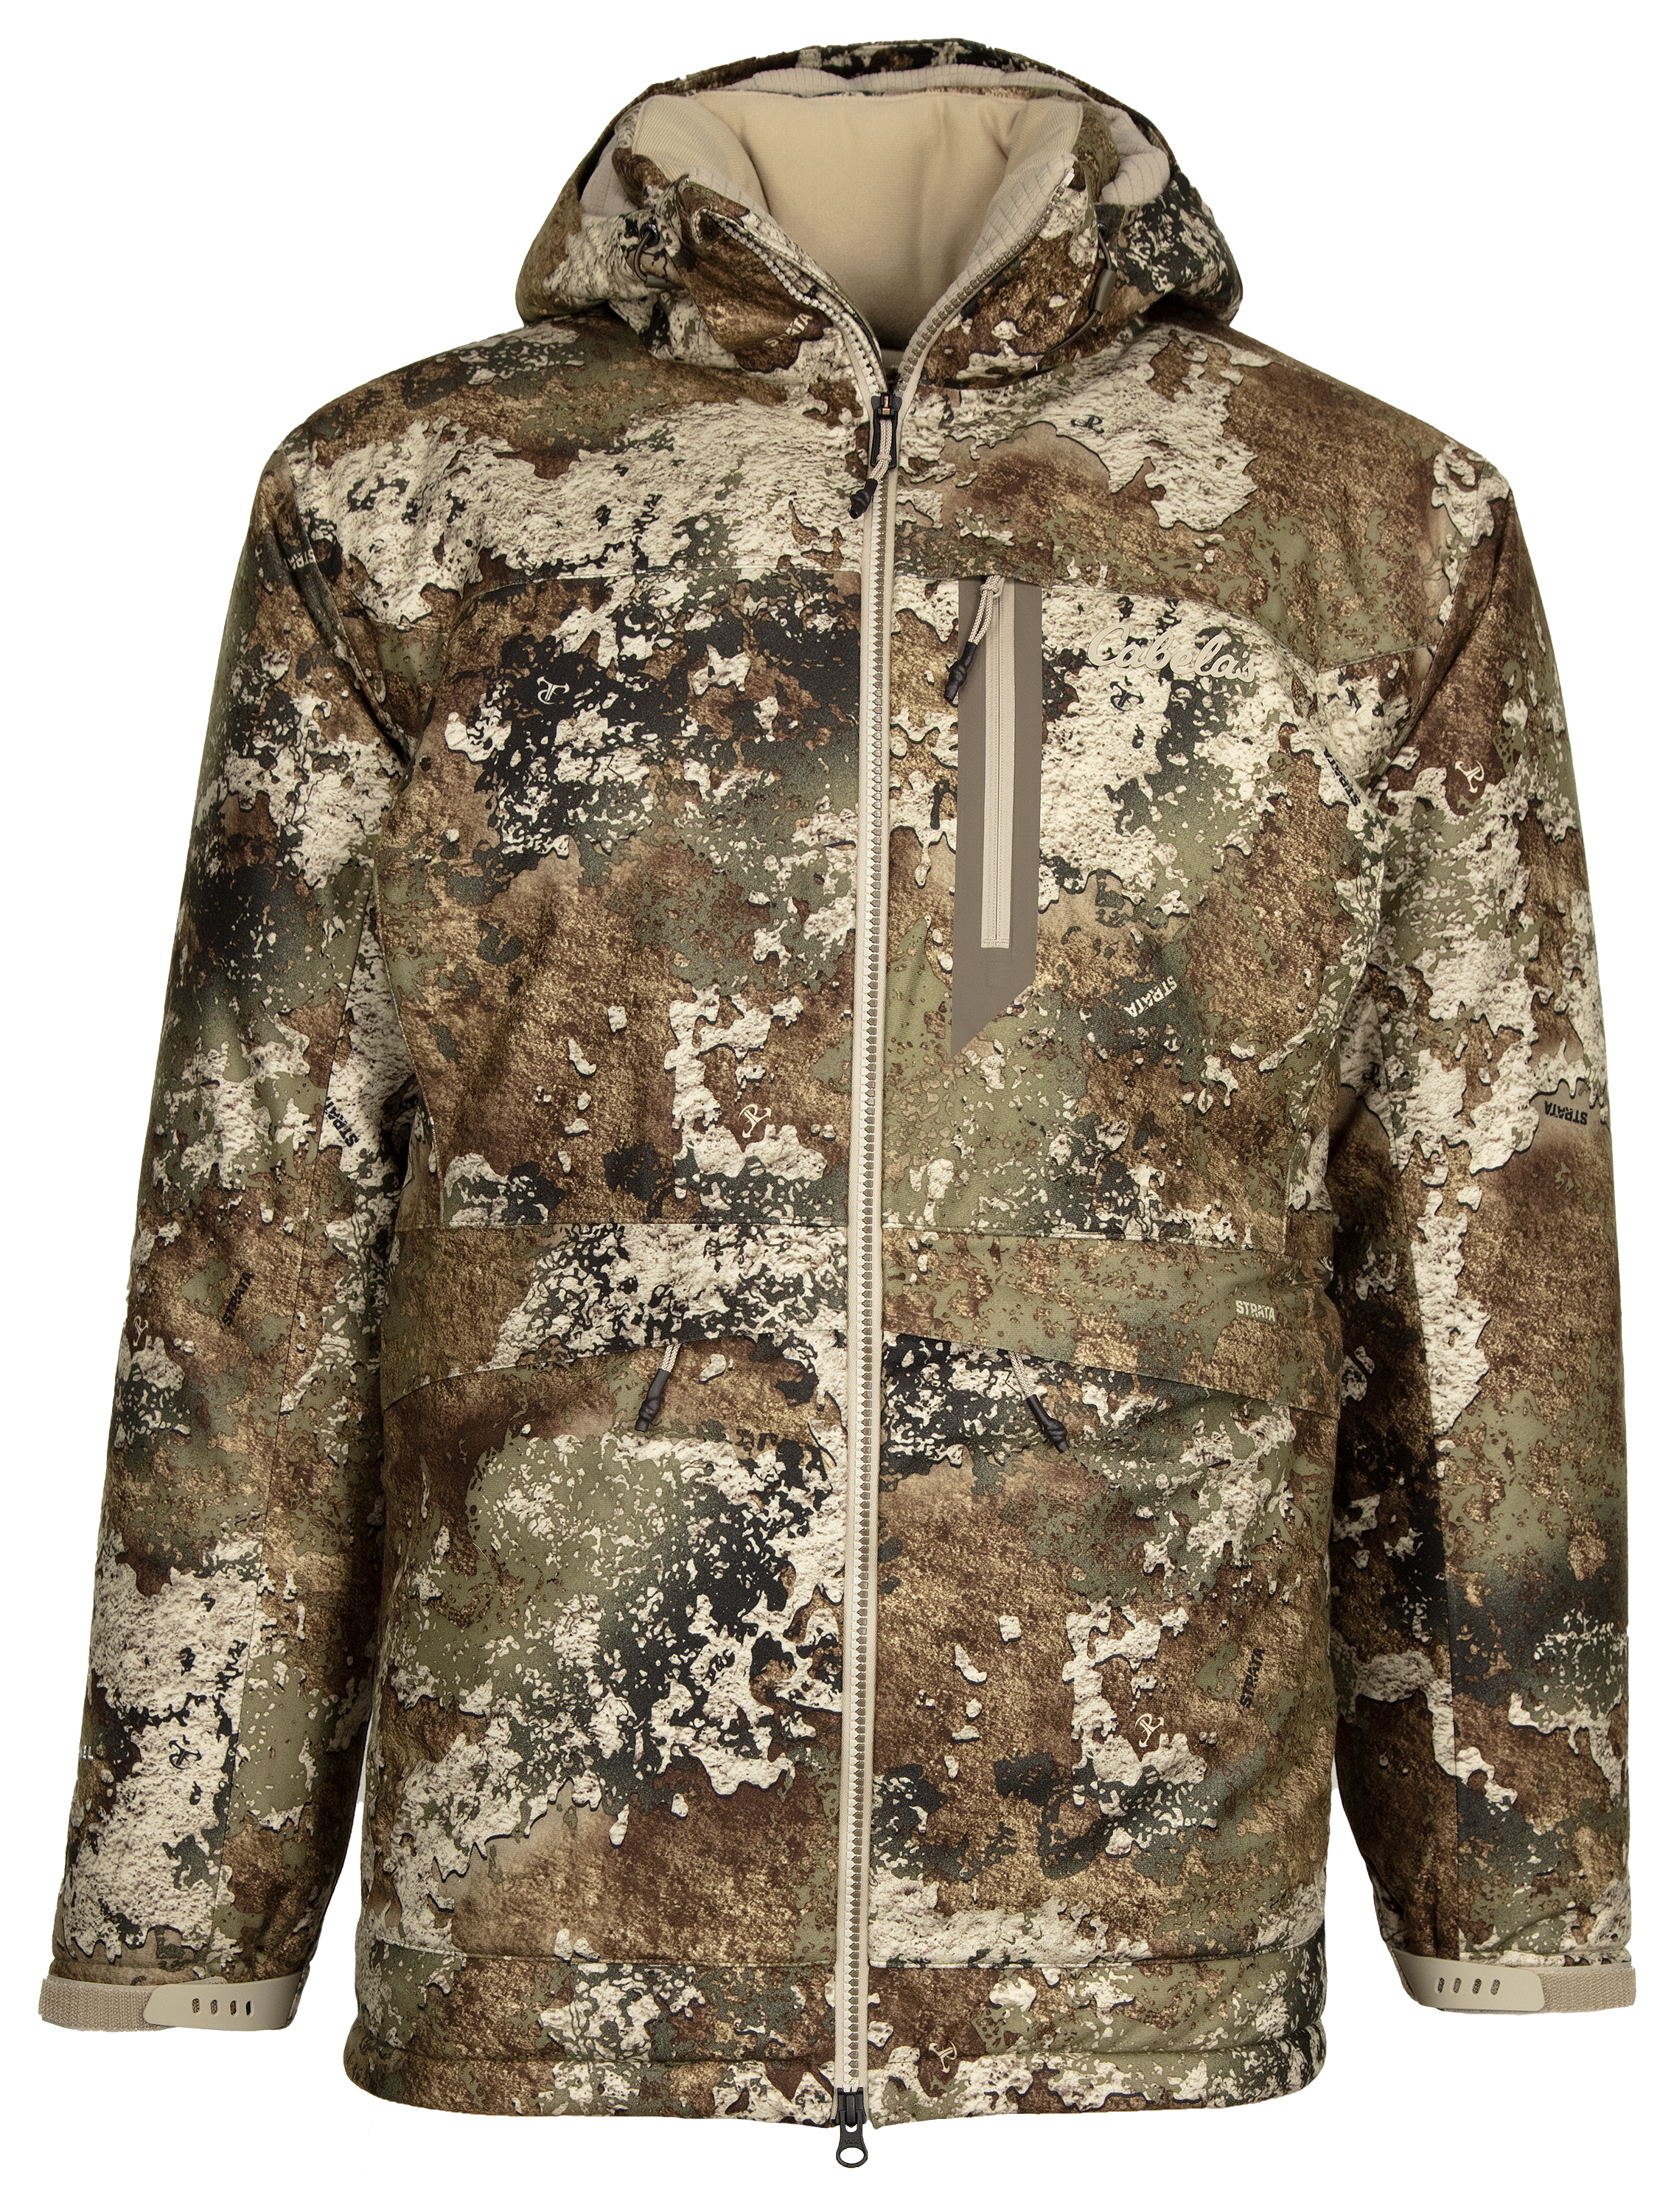 Cabela's MT050 Whitetail Extreme GORE-TEX Parka with SCENTINEL for